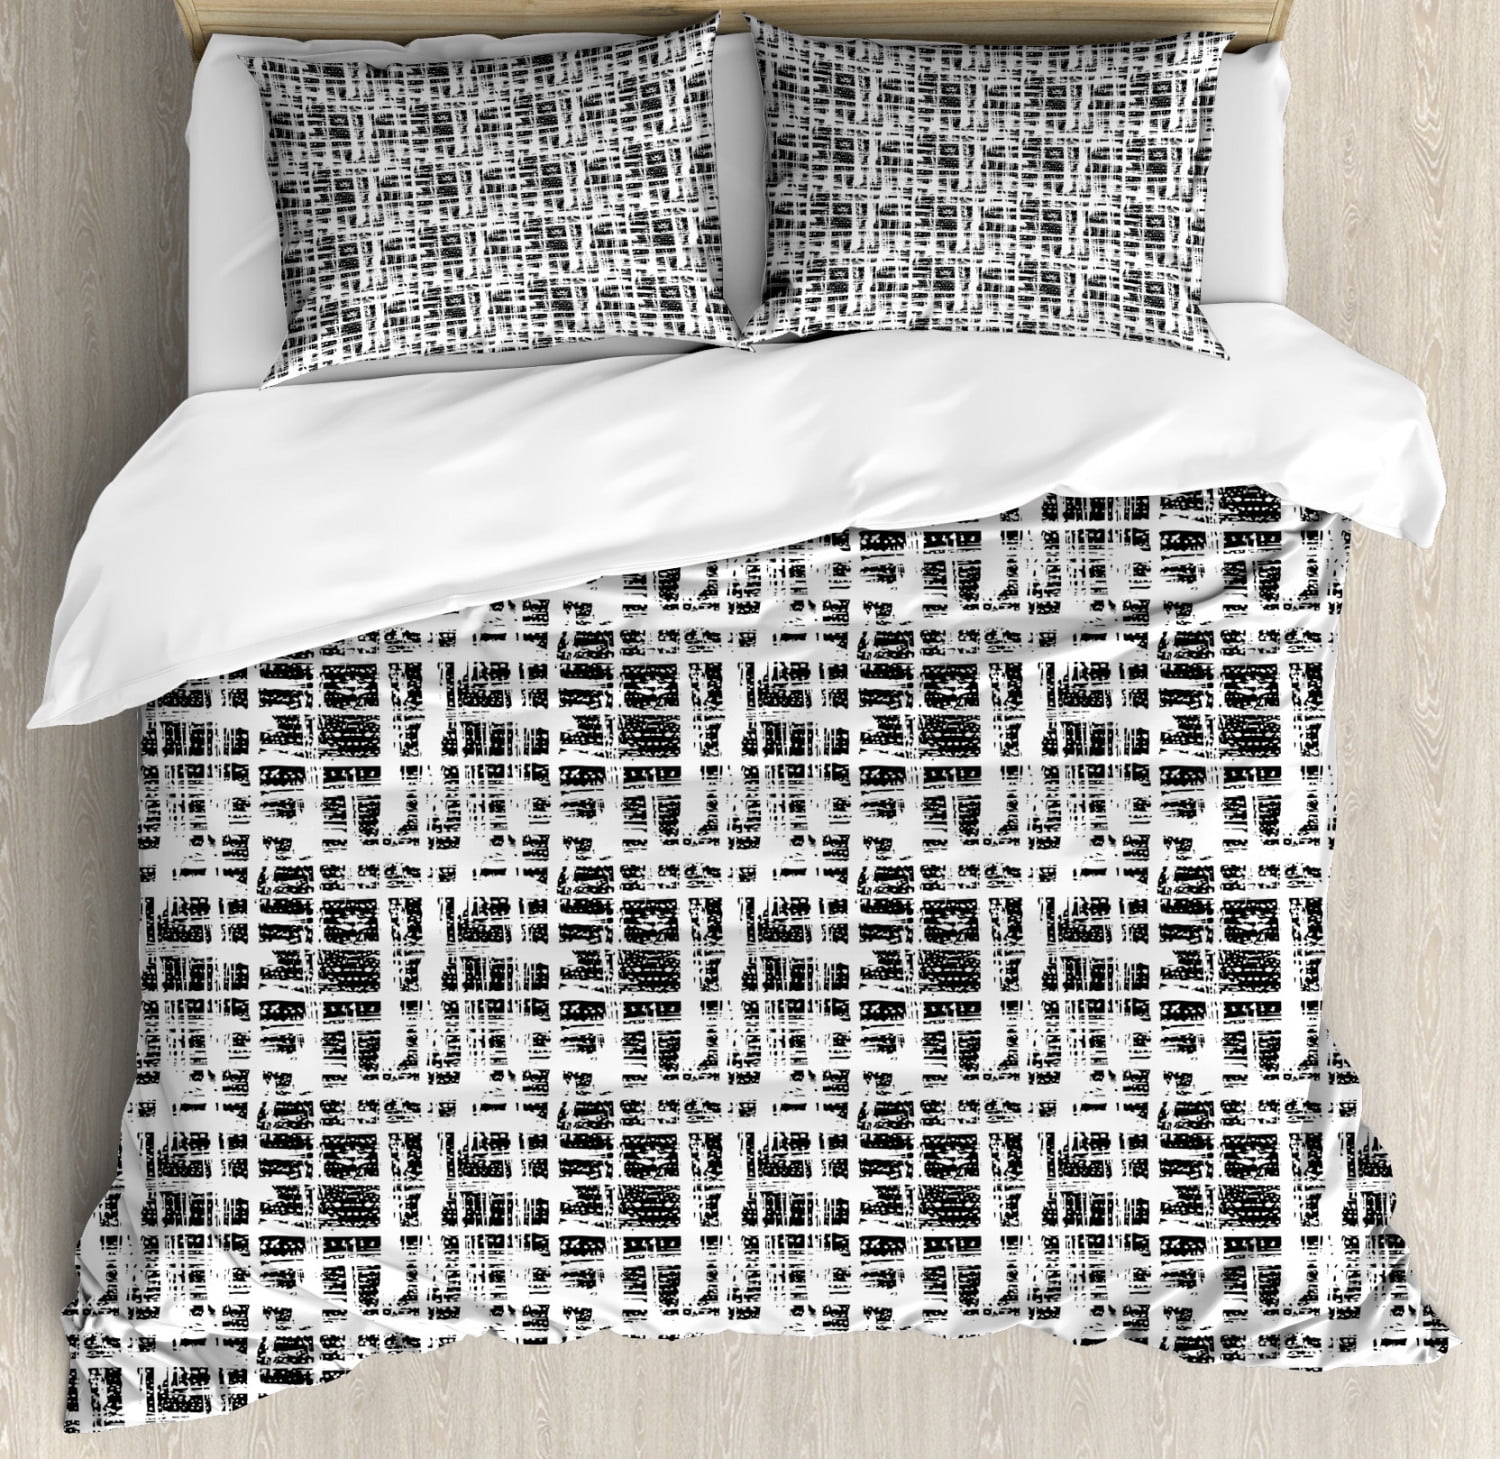 Black And White King Size Duvet Cover Set Abstract Watercolor